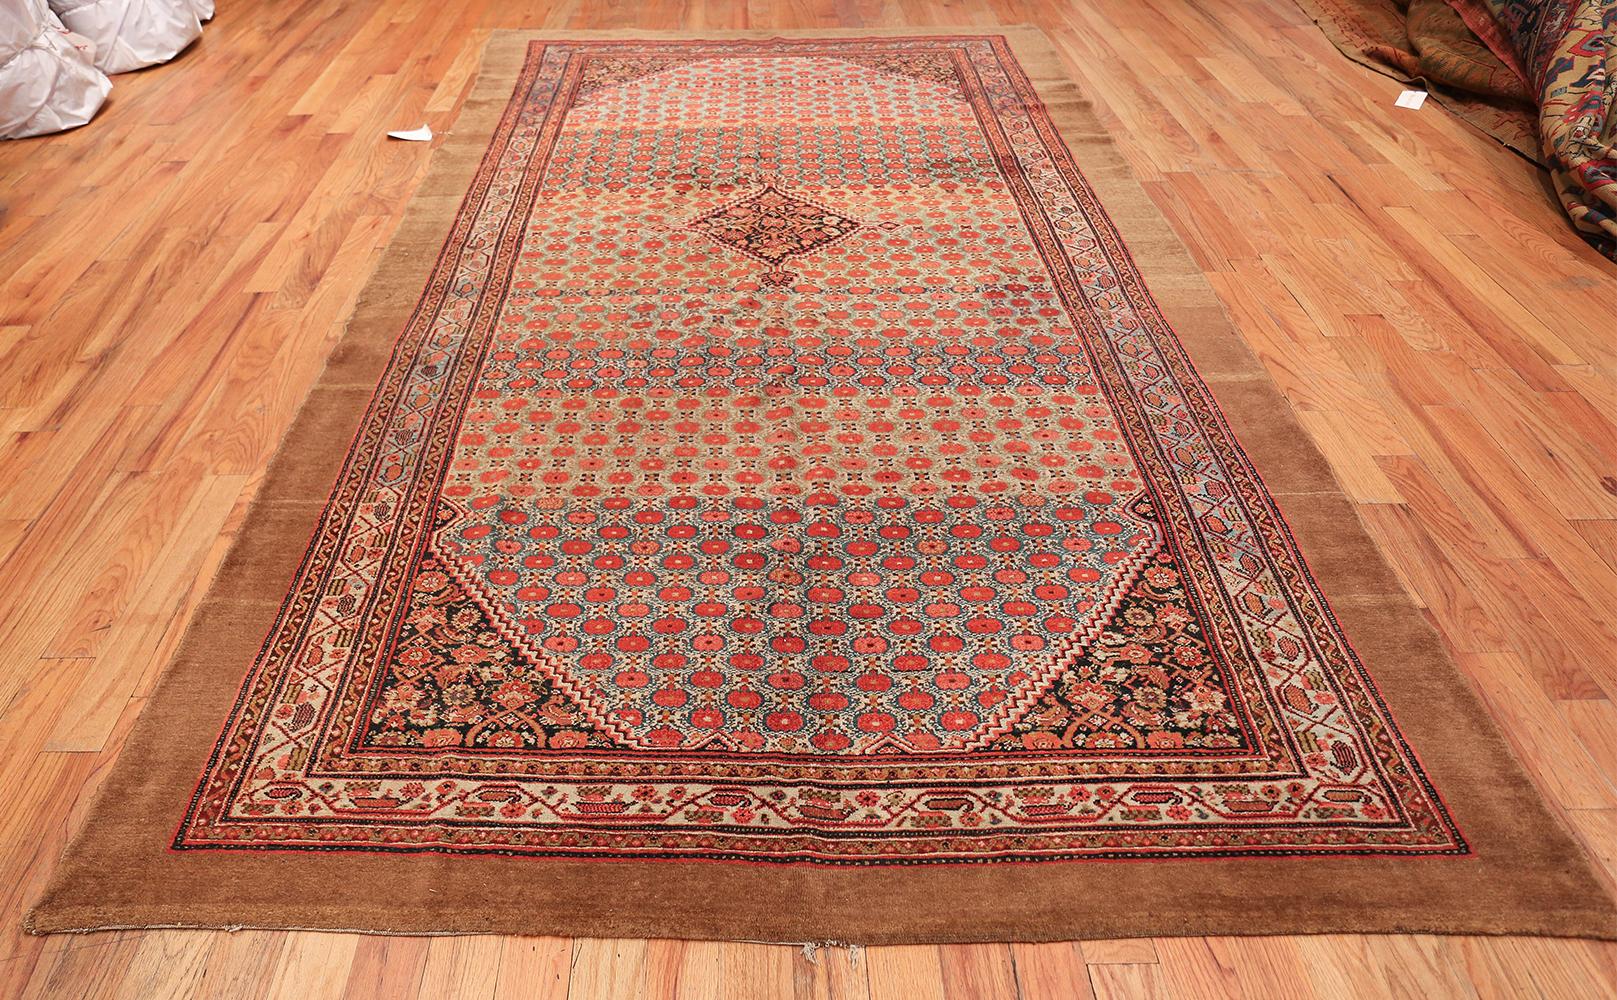 Tribal Antique Persian Serab Rug 49160, Country of Origin / Rug Type: Persian Rugs, Circa Date: 1880 - Unlike many traditional Persian rugs, this masterpiece sets itself apart by using a strong series of patterns to create a relatively simple